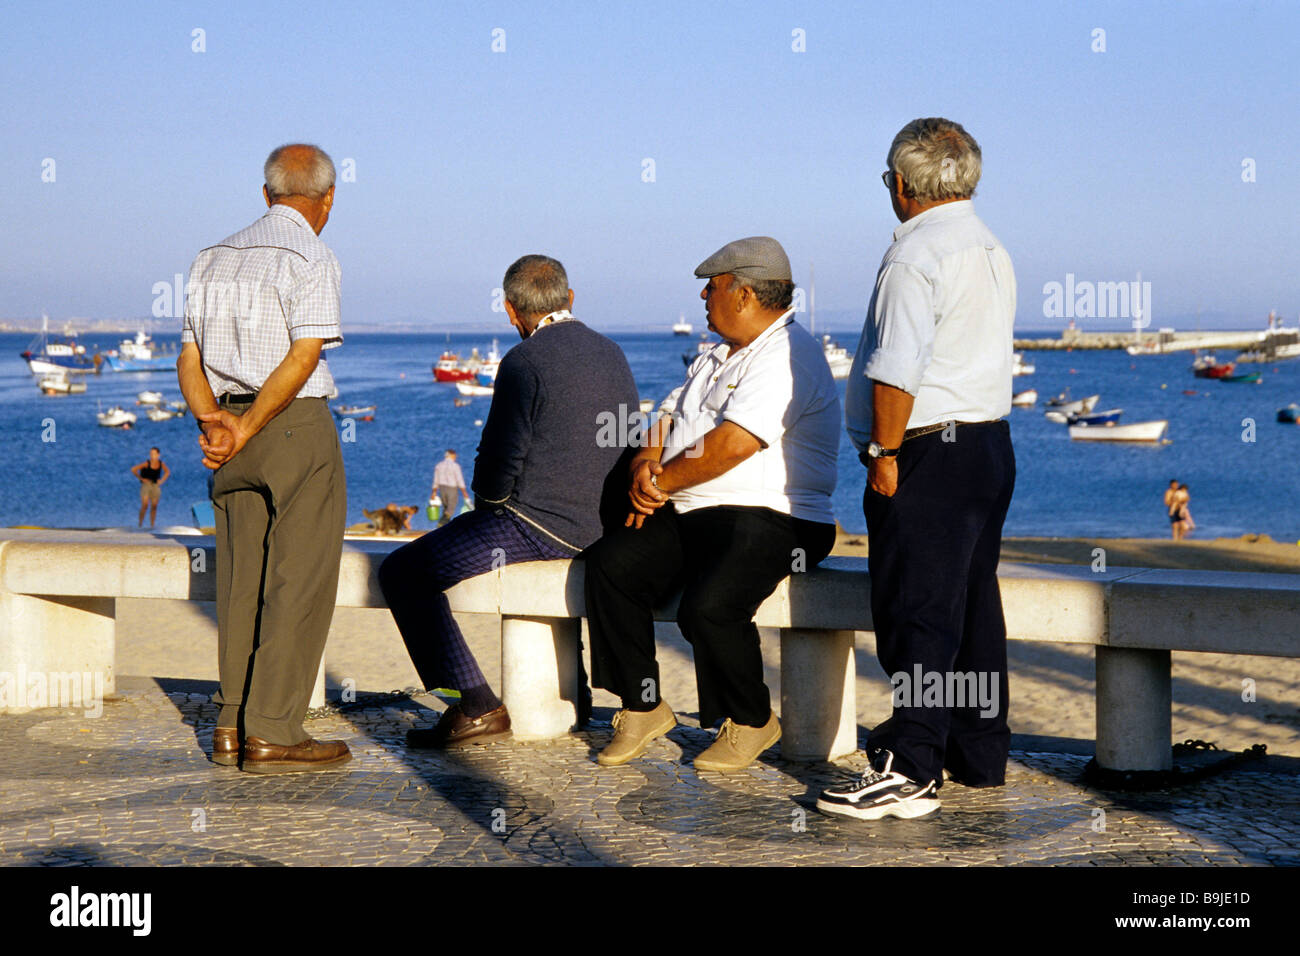 Porto de Pesca, old men looking out to sea, boats at the harbour of Cascais, a fishing village, grown together with Estoril, Li Stock Photo